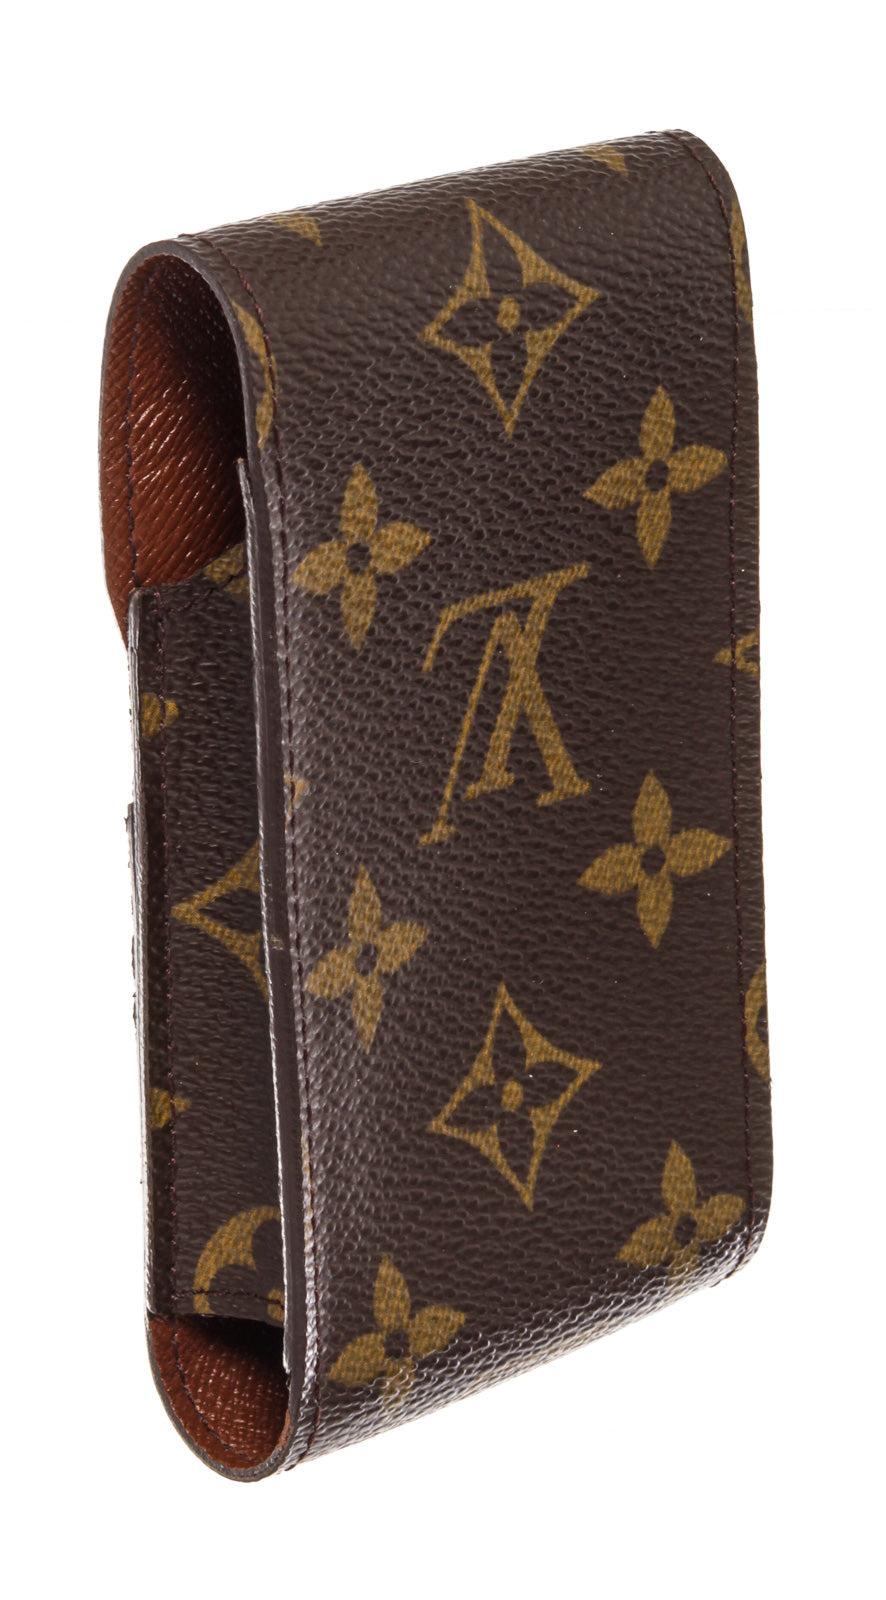 Beige Brown and tan monogram coated canvas Louis Vuitton cigarette holder with leather